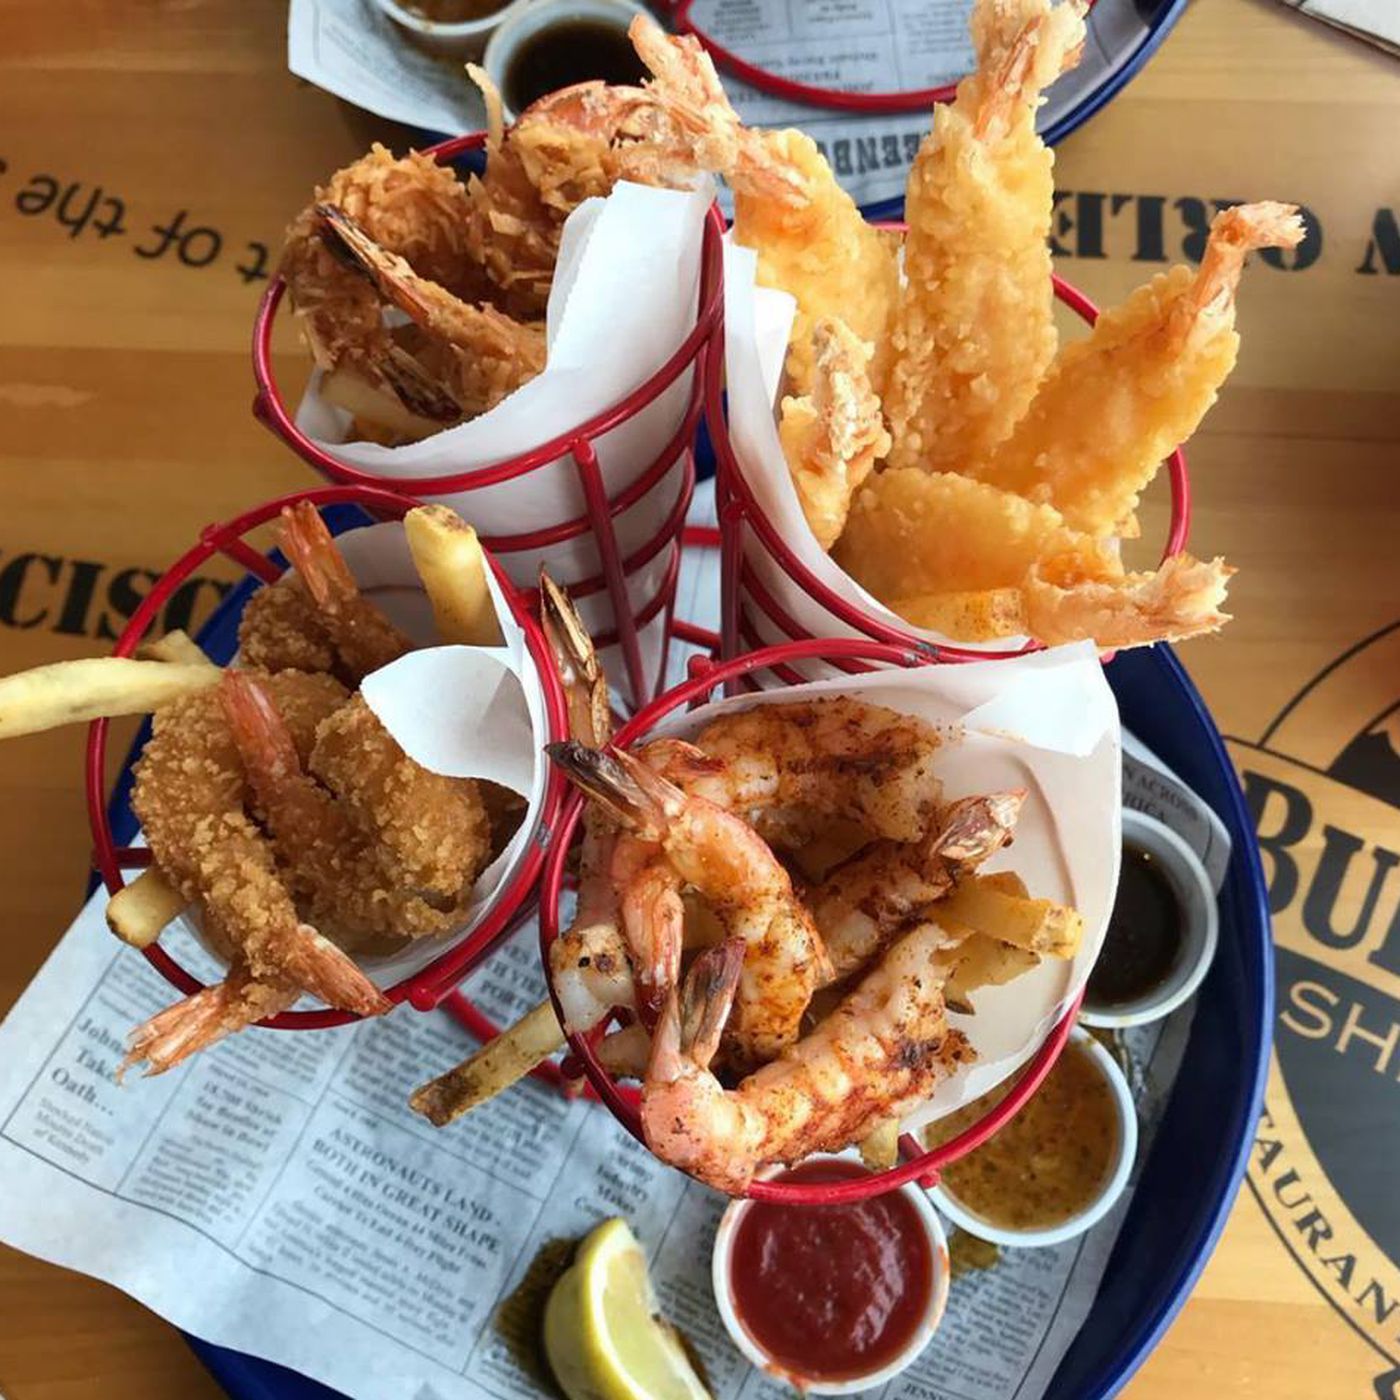 Where do locals eat seafood in Orlando